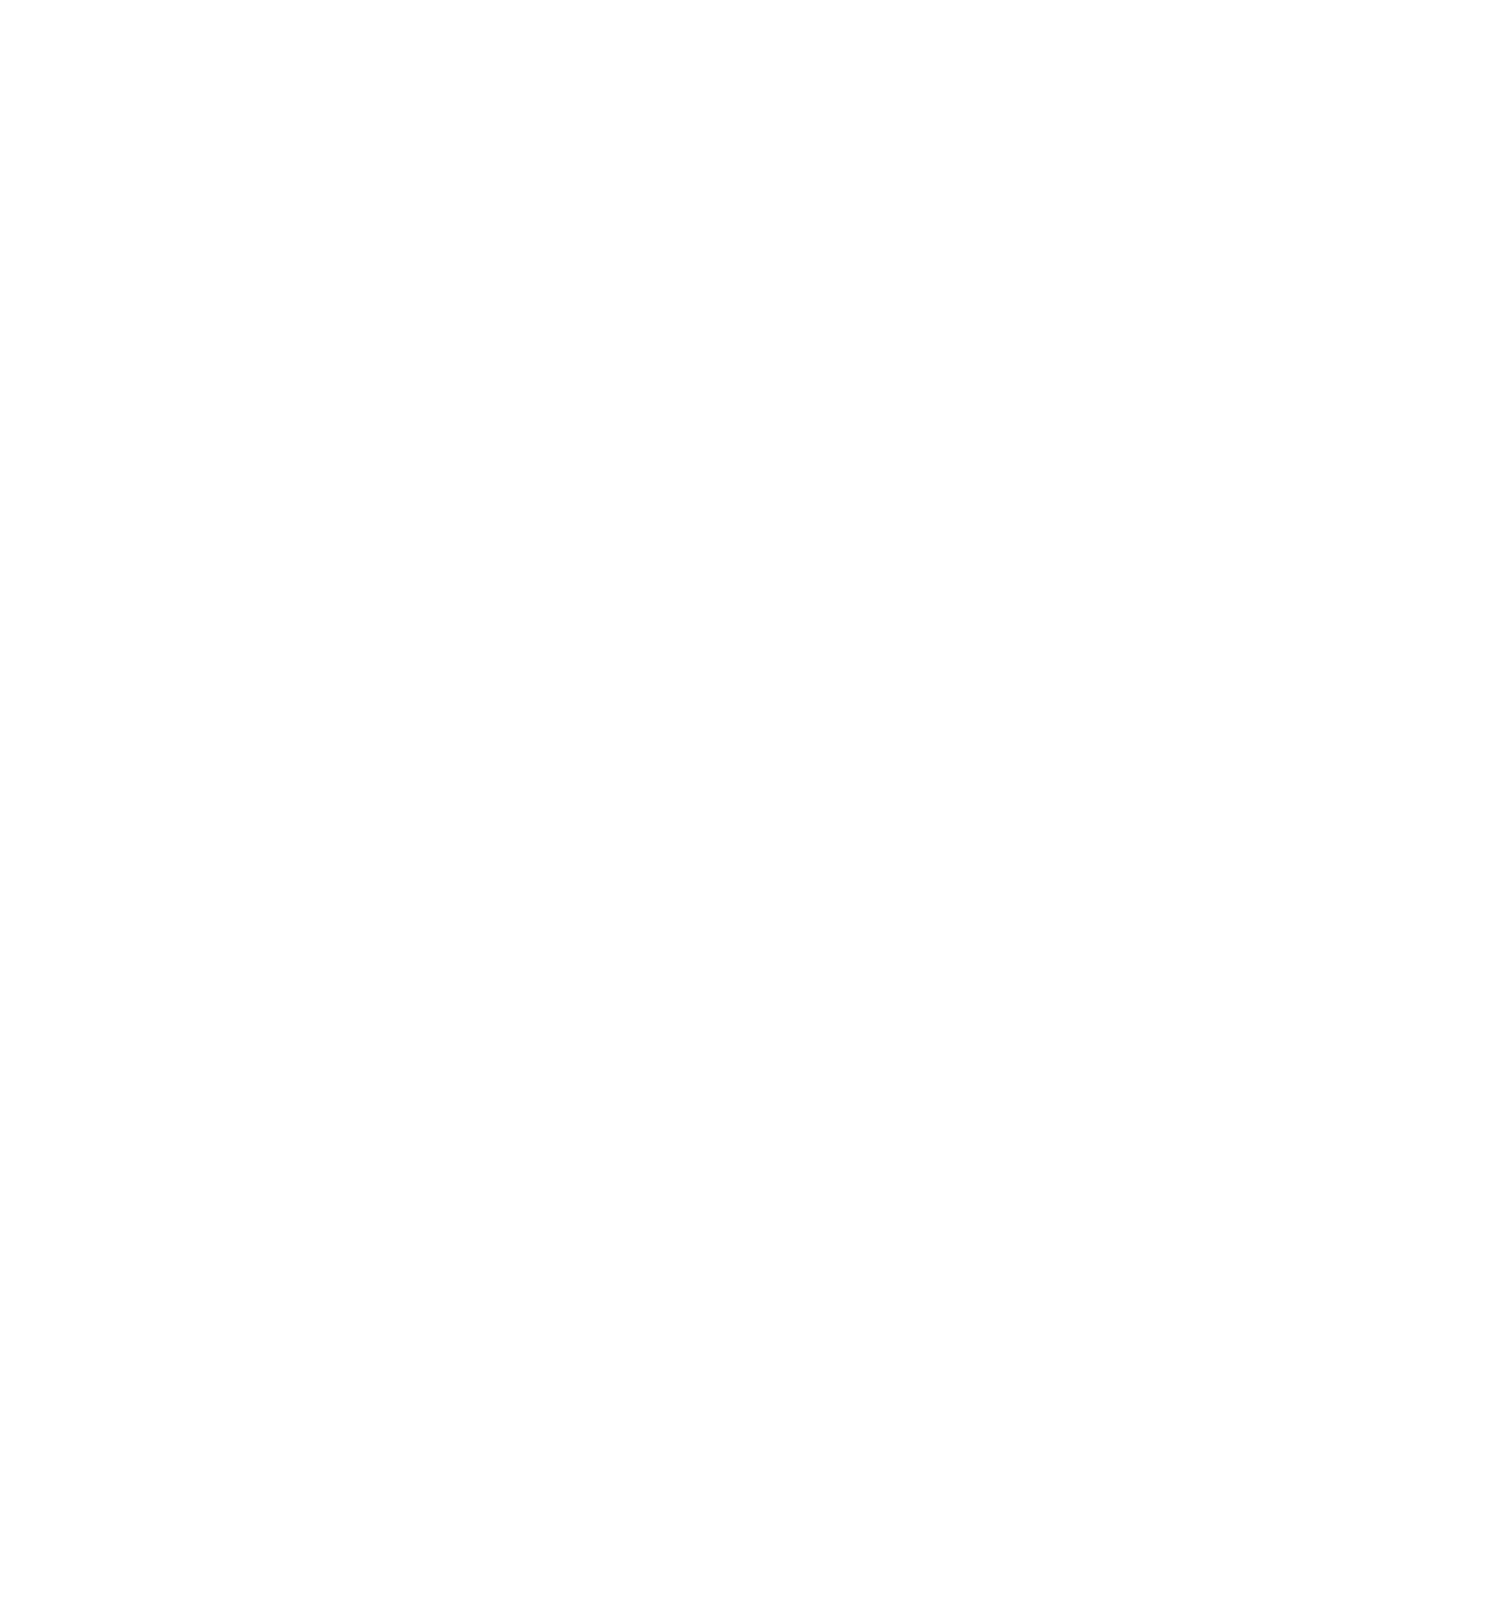 Sweatcity Mobile Health and Recovery